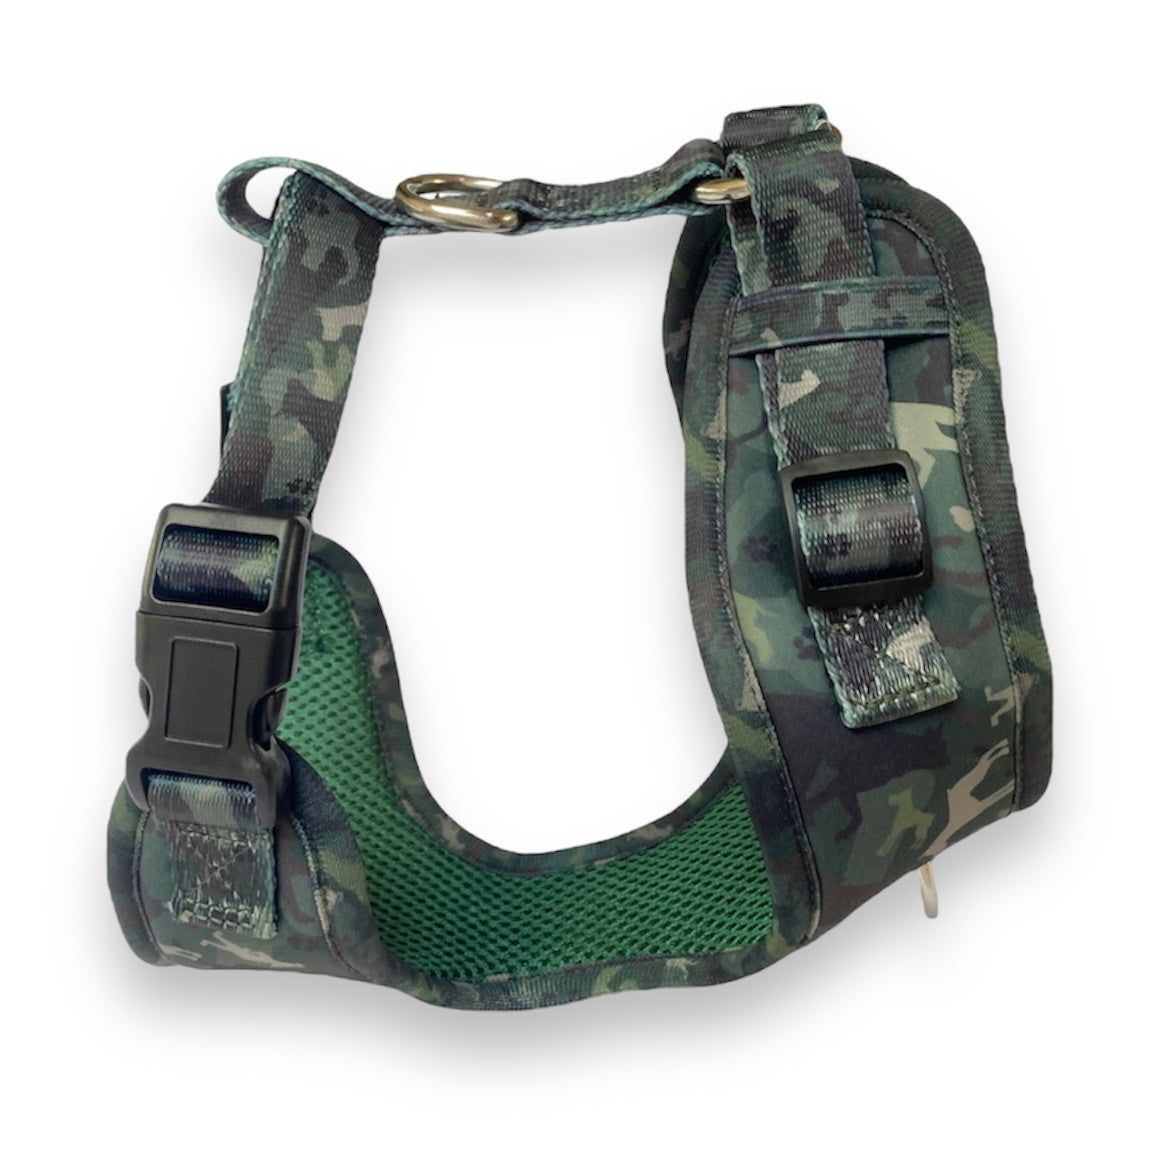 a 3D image of a no escape harness from Fearless pet in a green camouflage small dog harness no pull